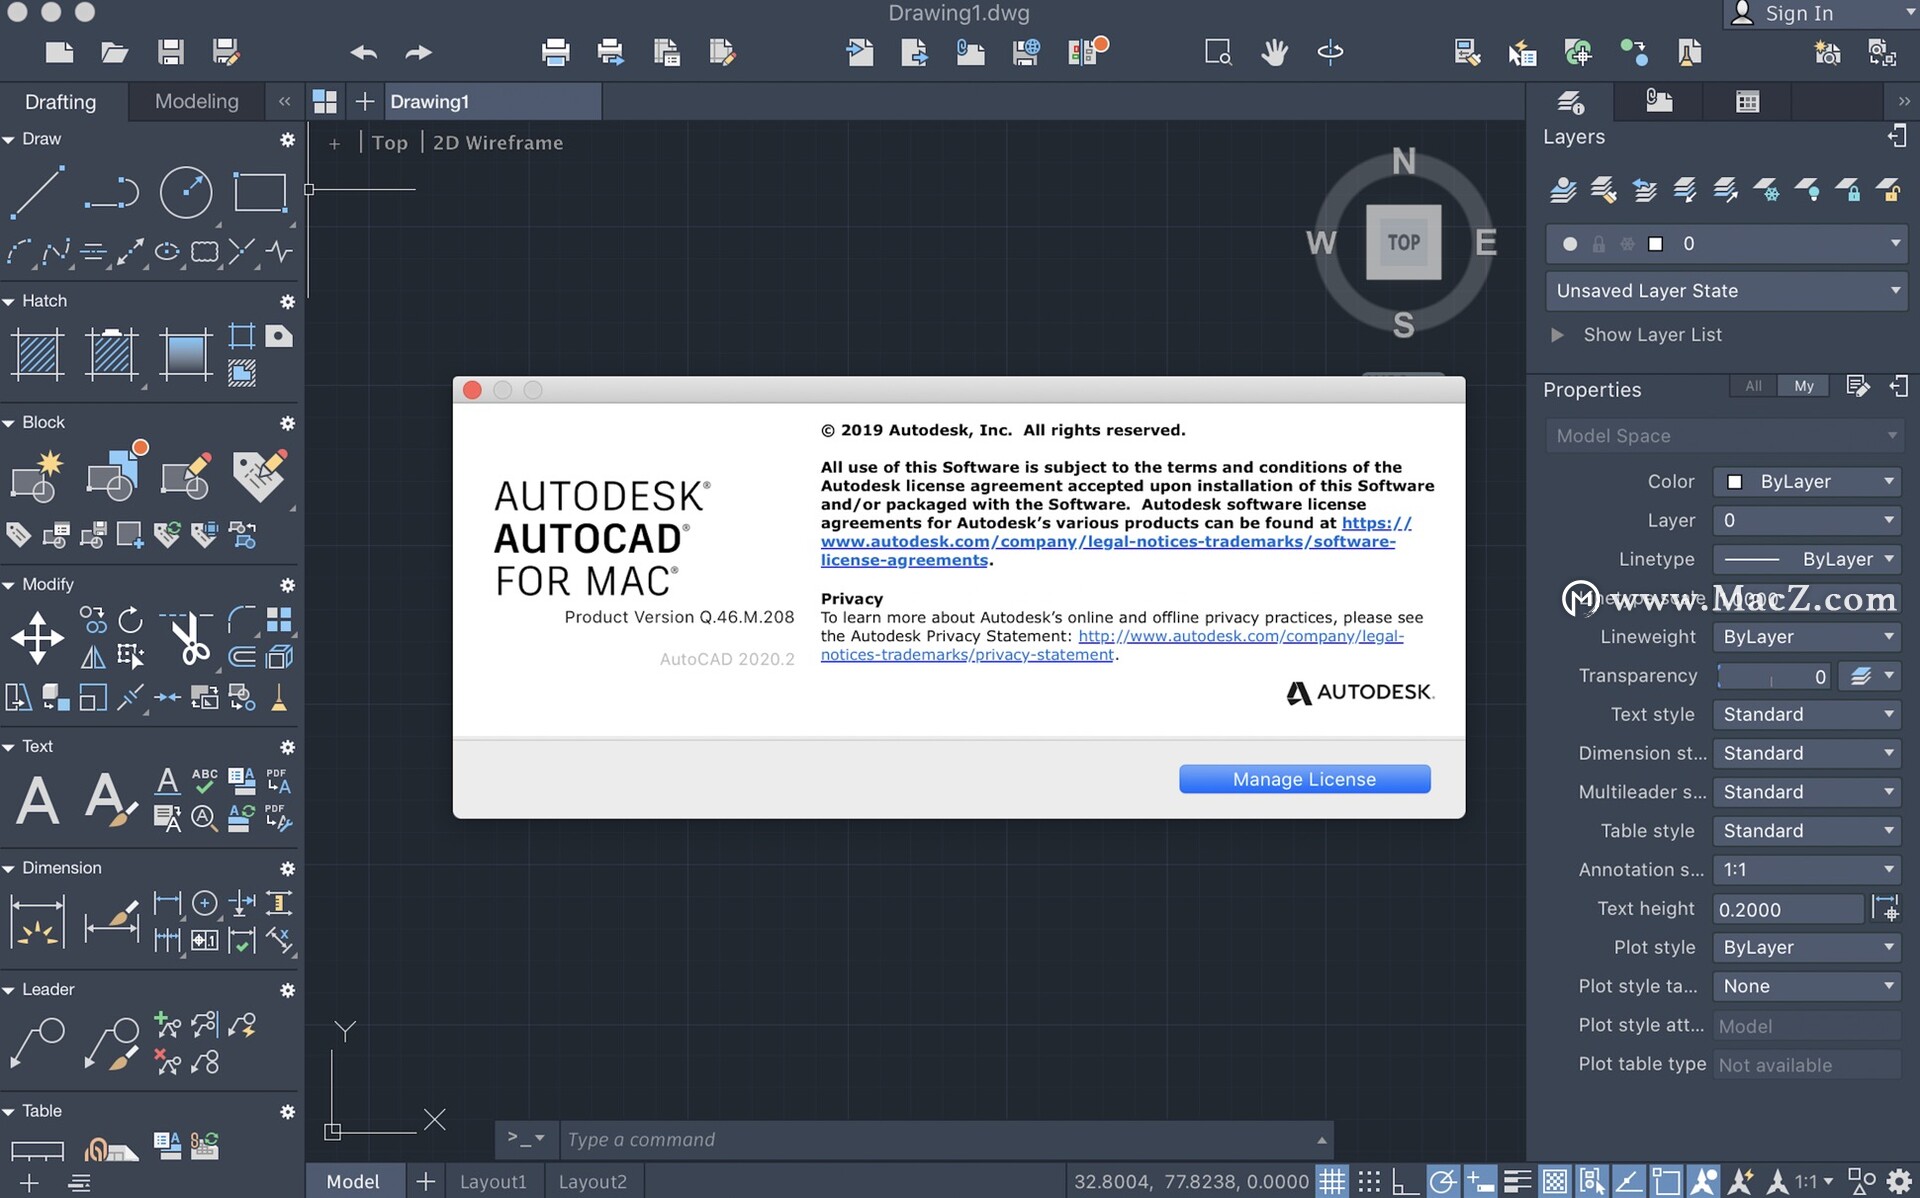 autocad 2020 for mac free download